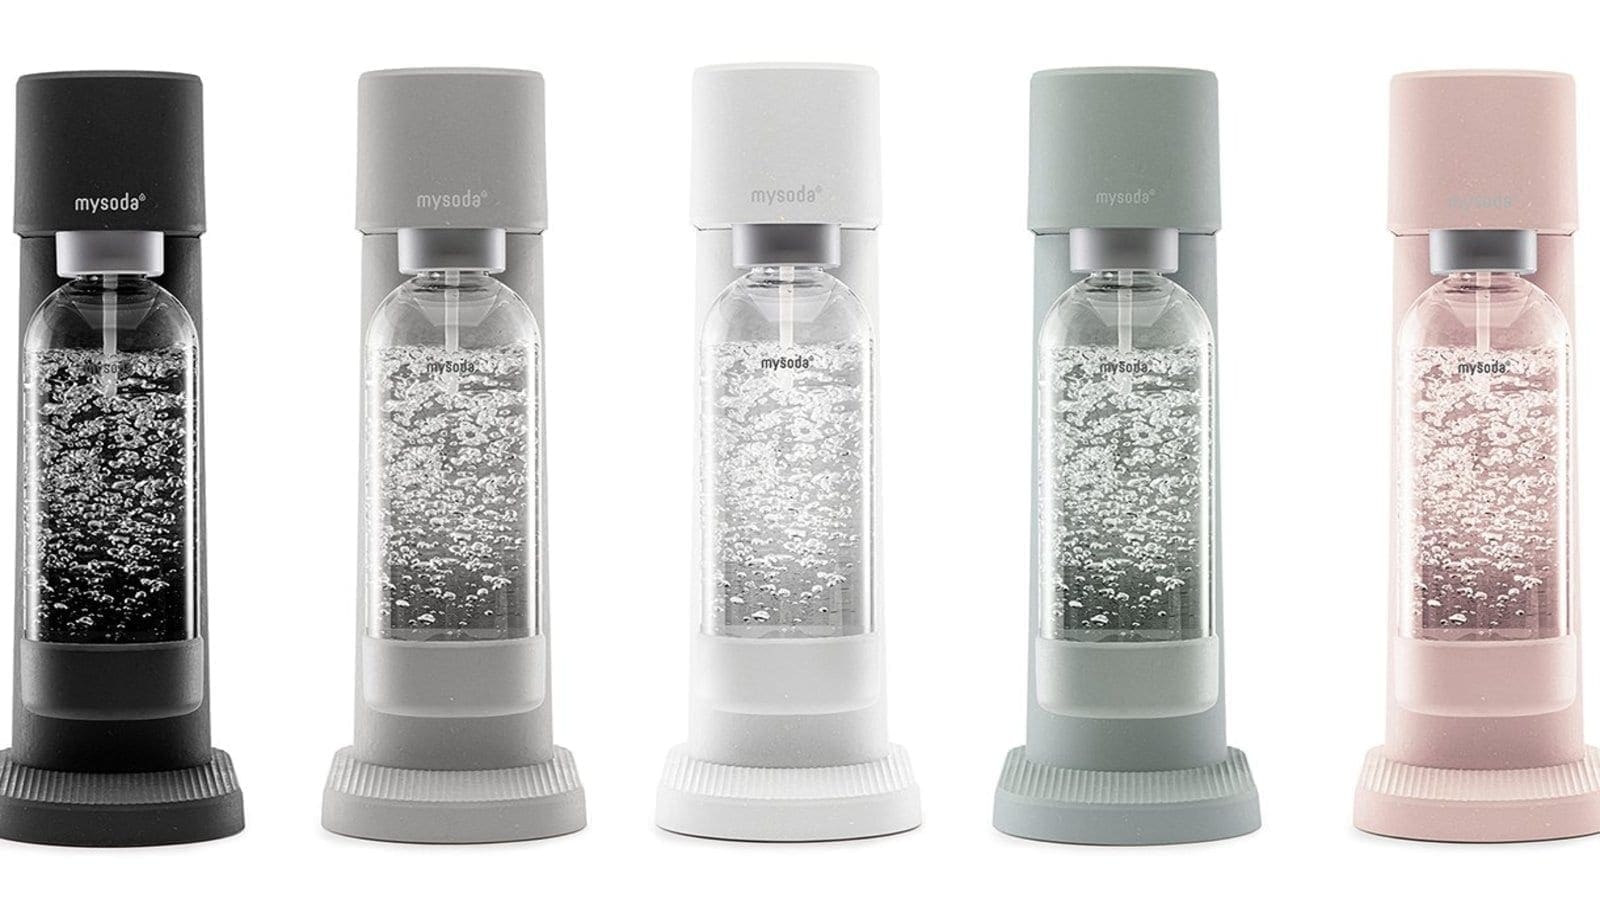 MySoda replaces undesirable plastic-based sparkling water makers with wood-based alternatives